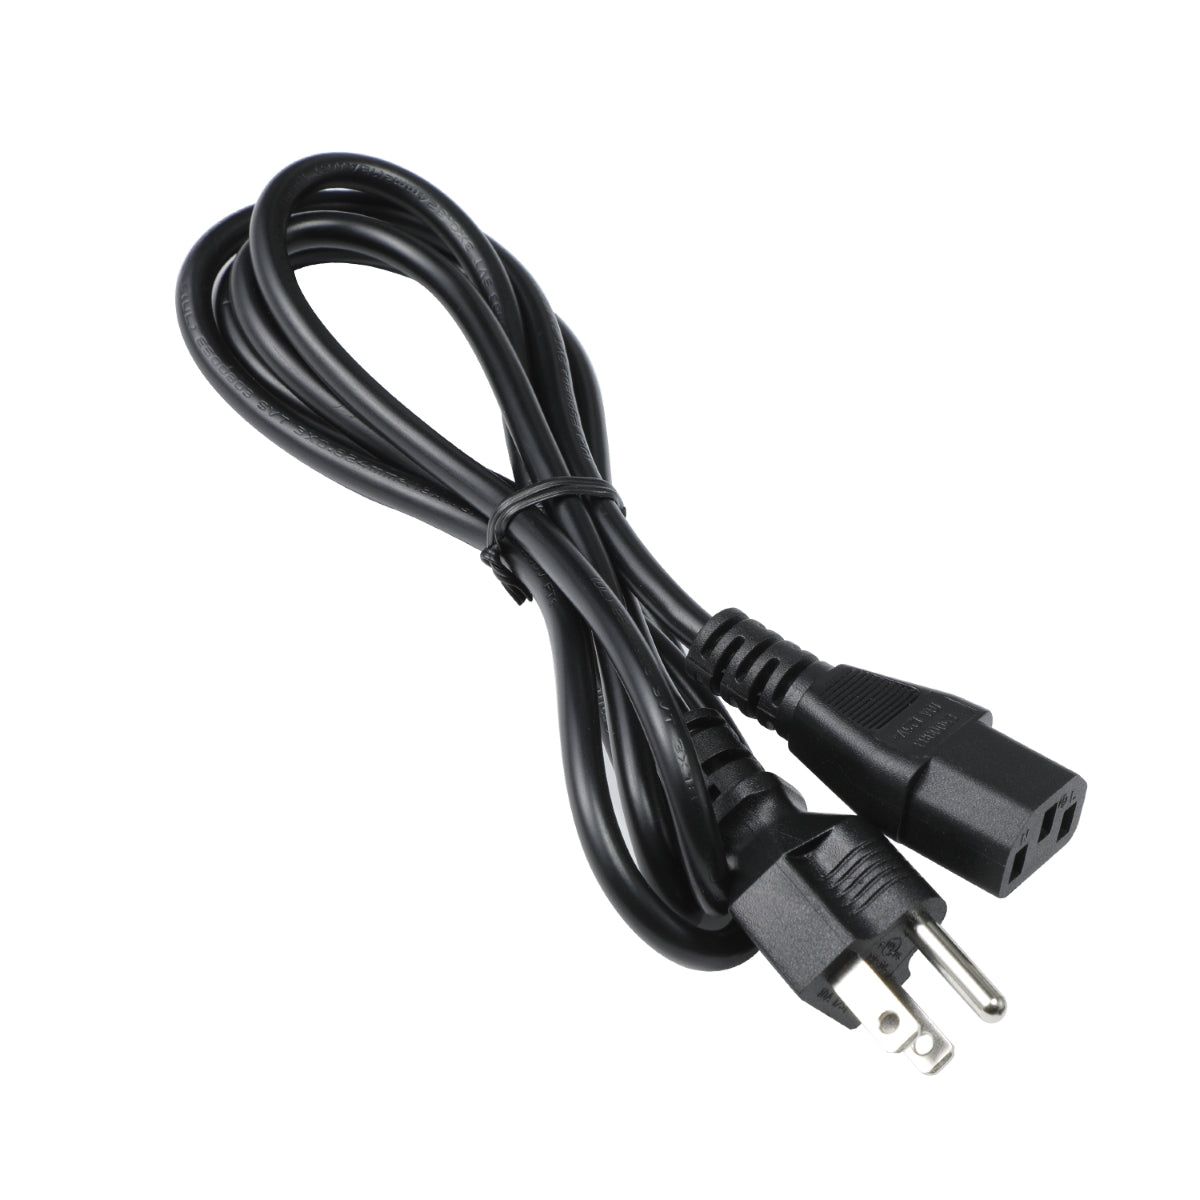 Power Cord for HP Pavilion 550-140 Computer.